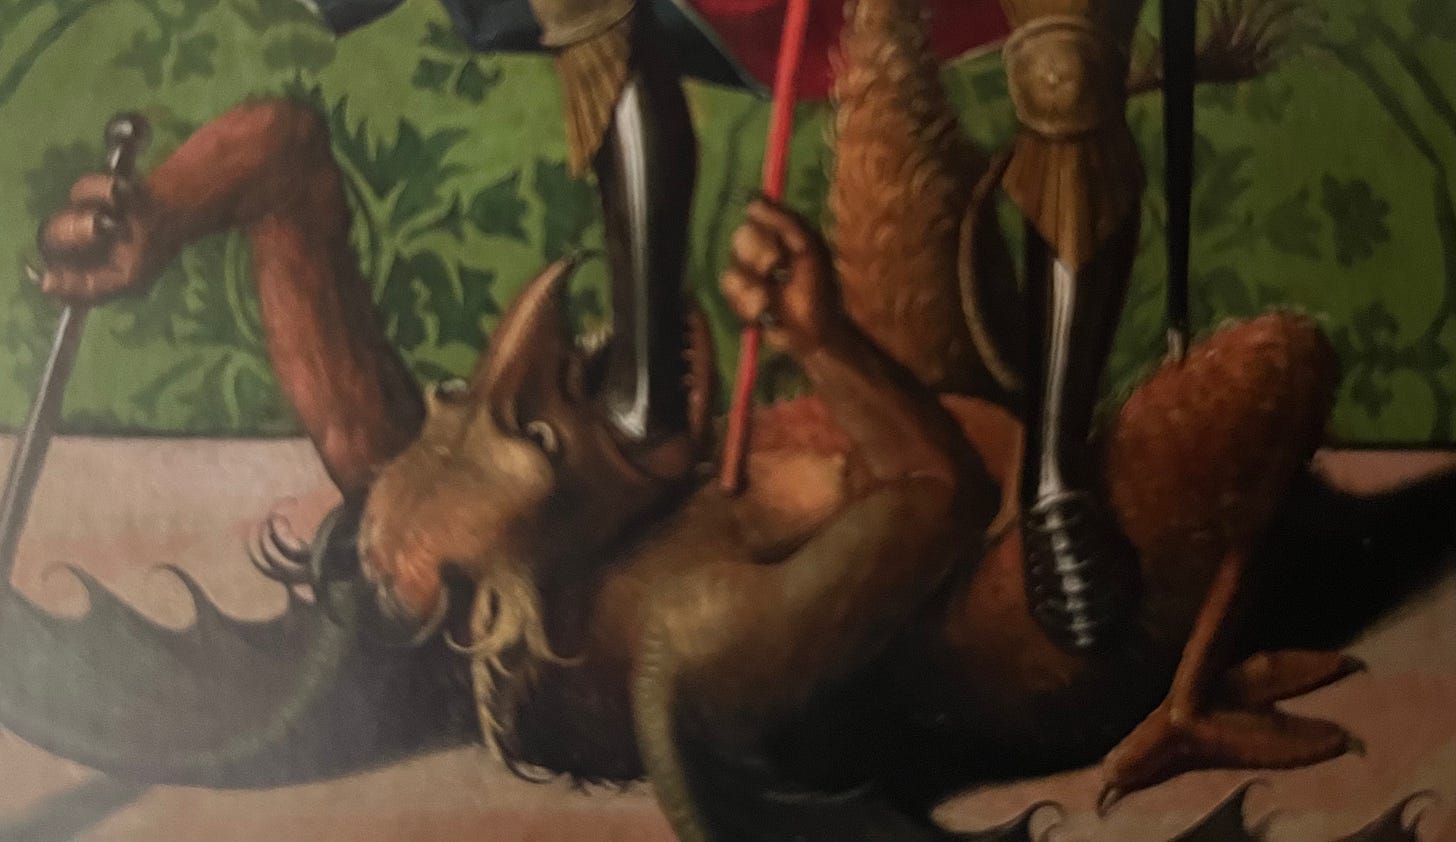 A winged demon getting a boot to the mouth, in a painting from the 1400s